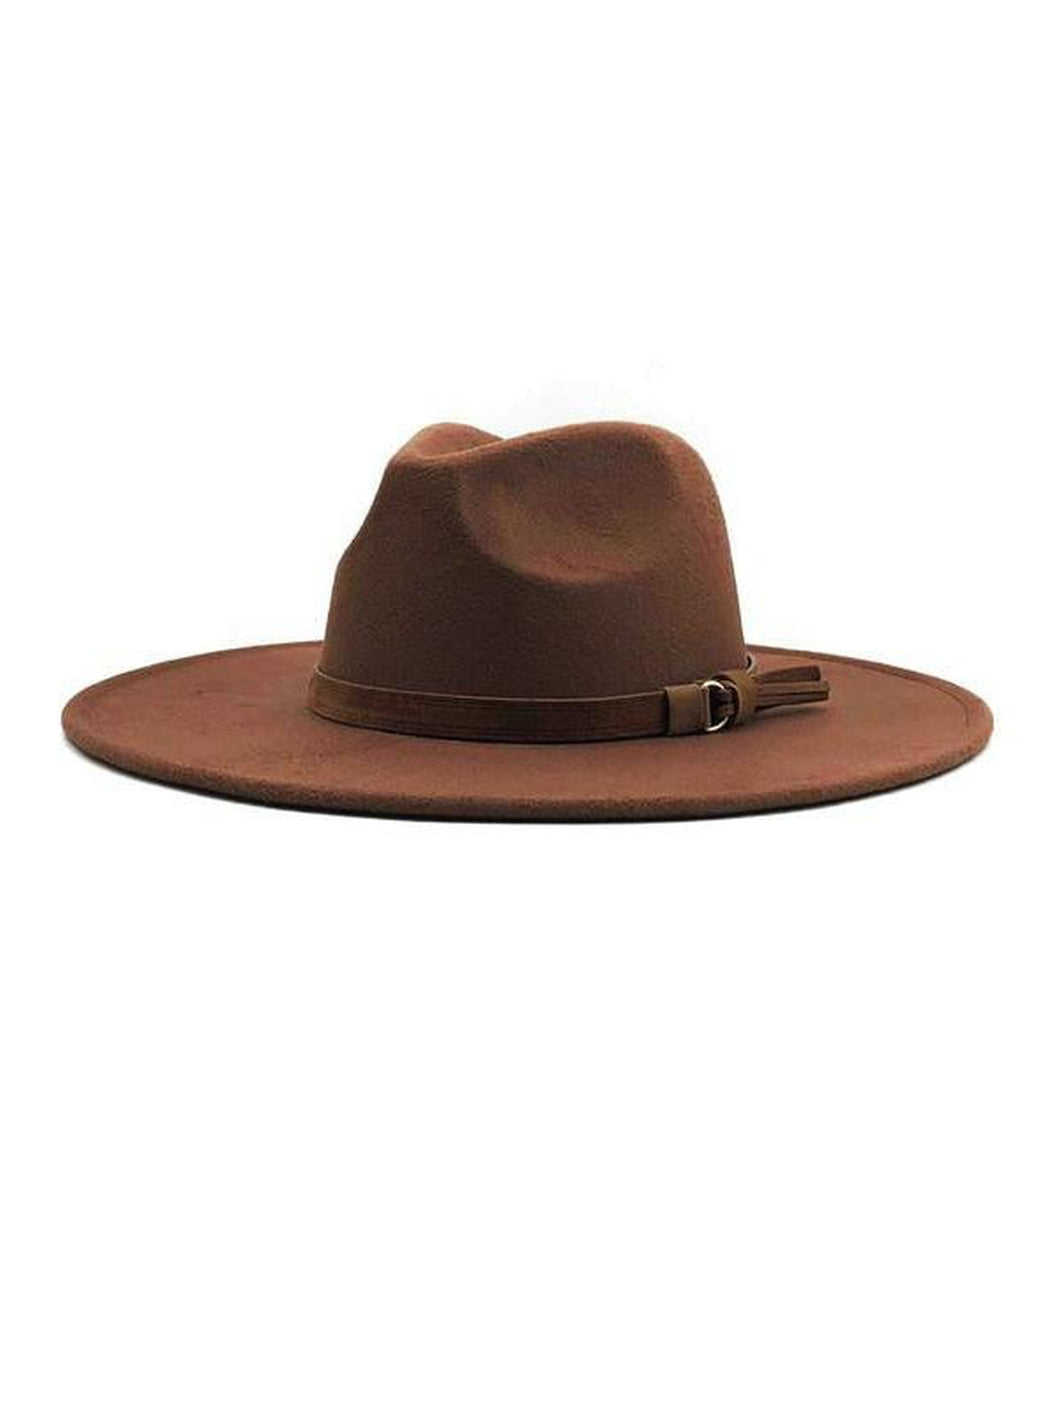 WIDE BRIM PANAMA HATS WITH SIMPLE BELT